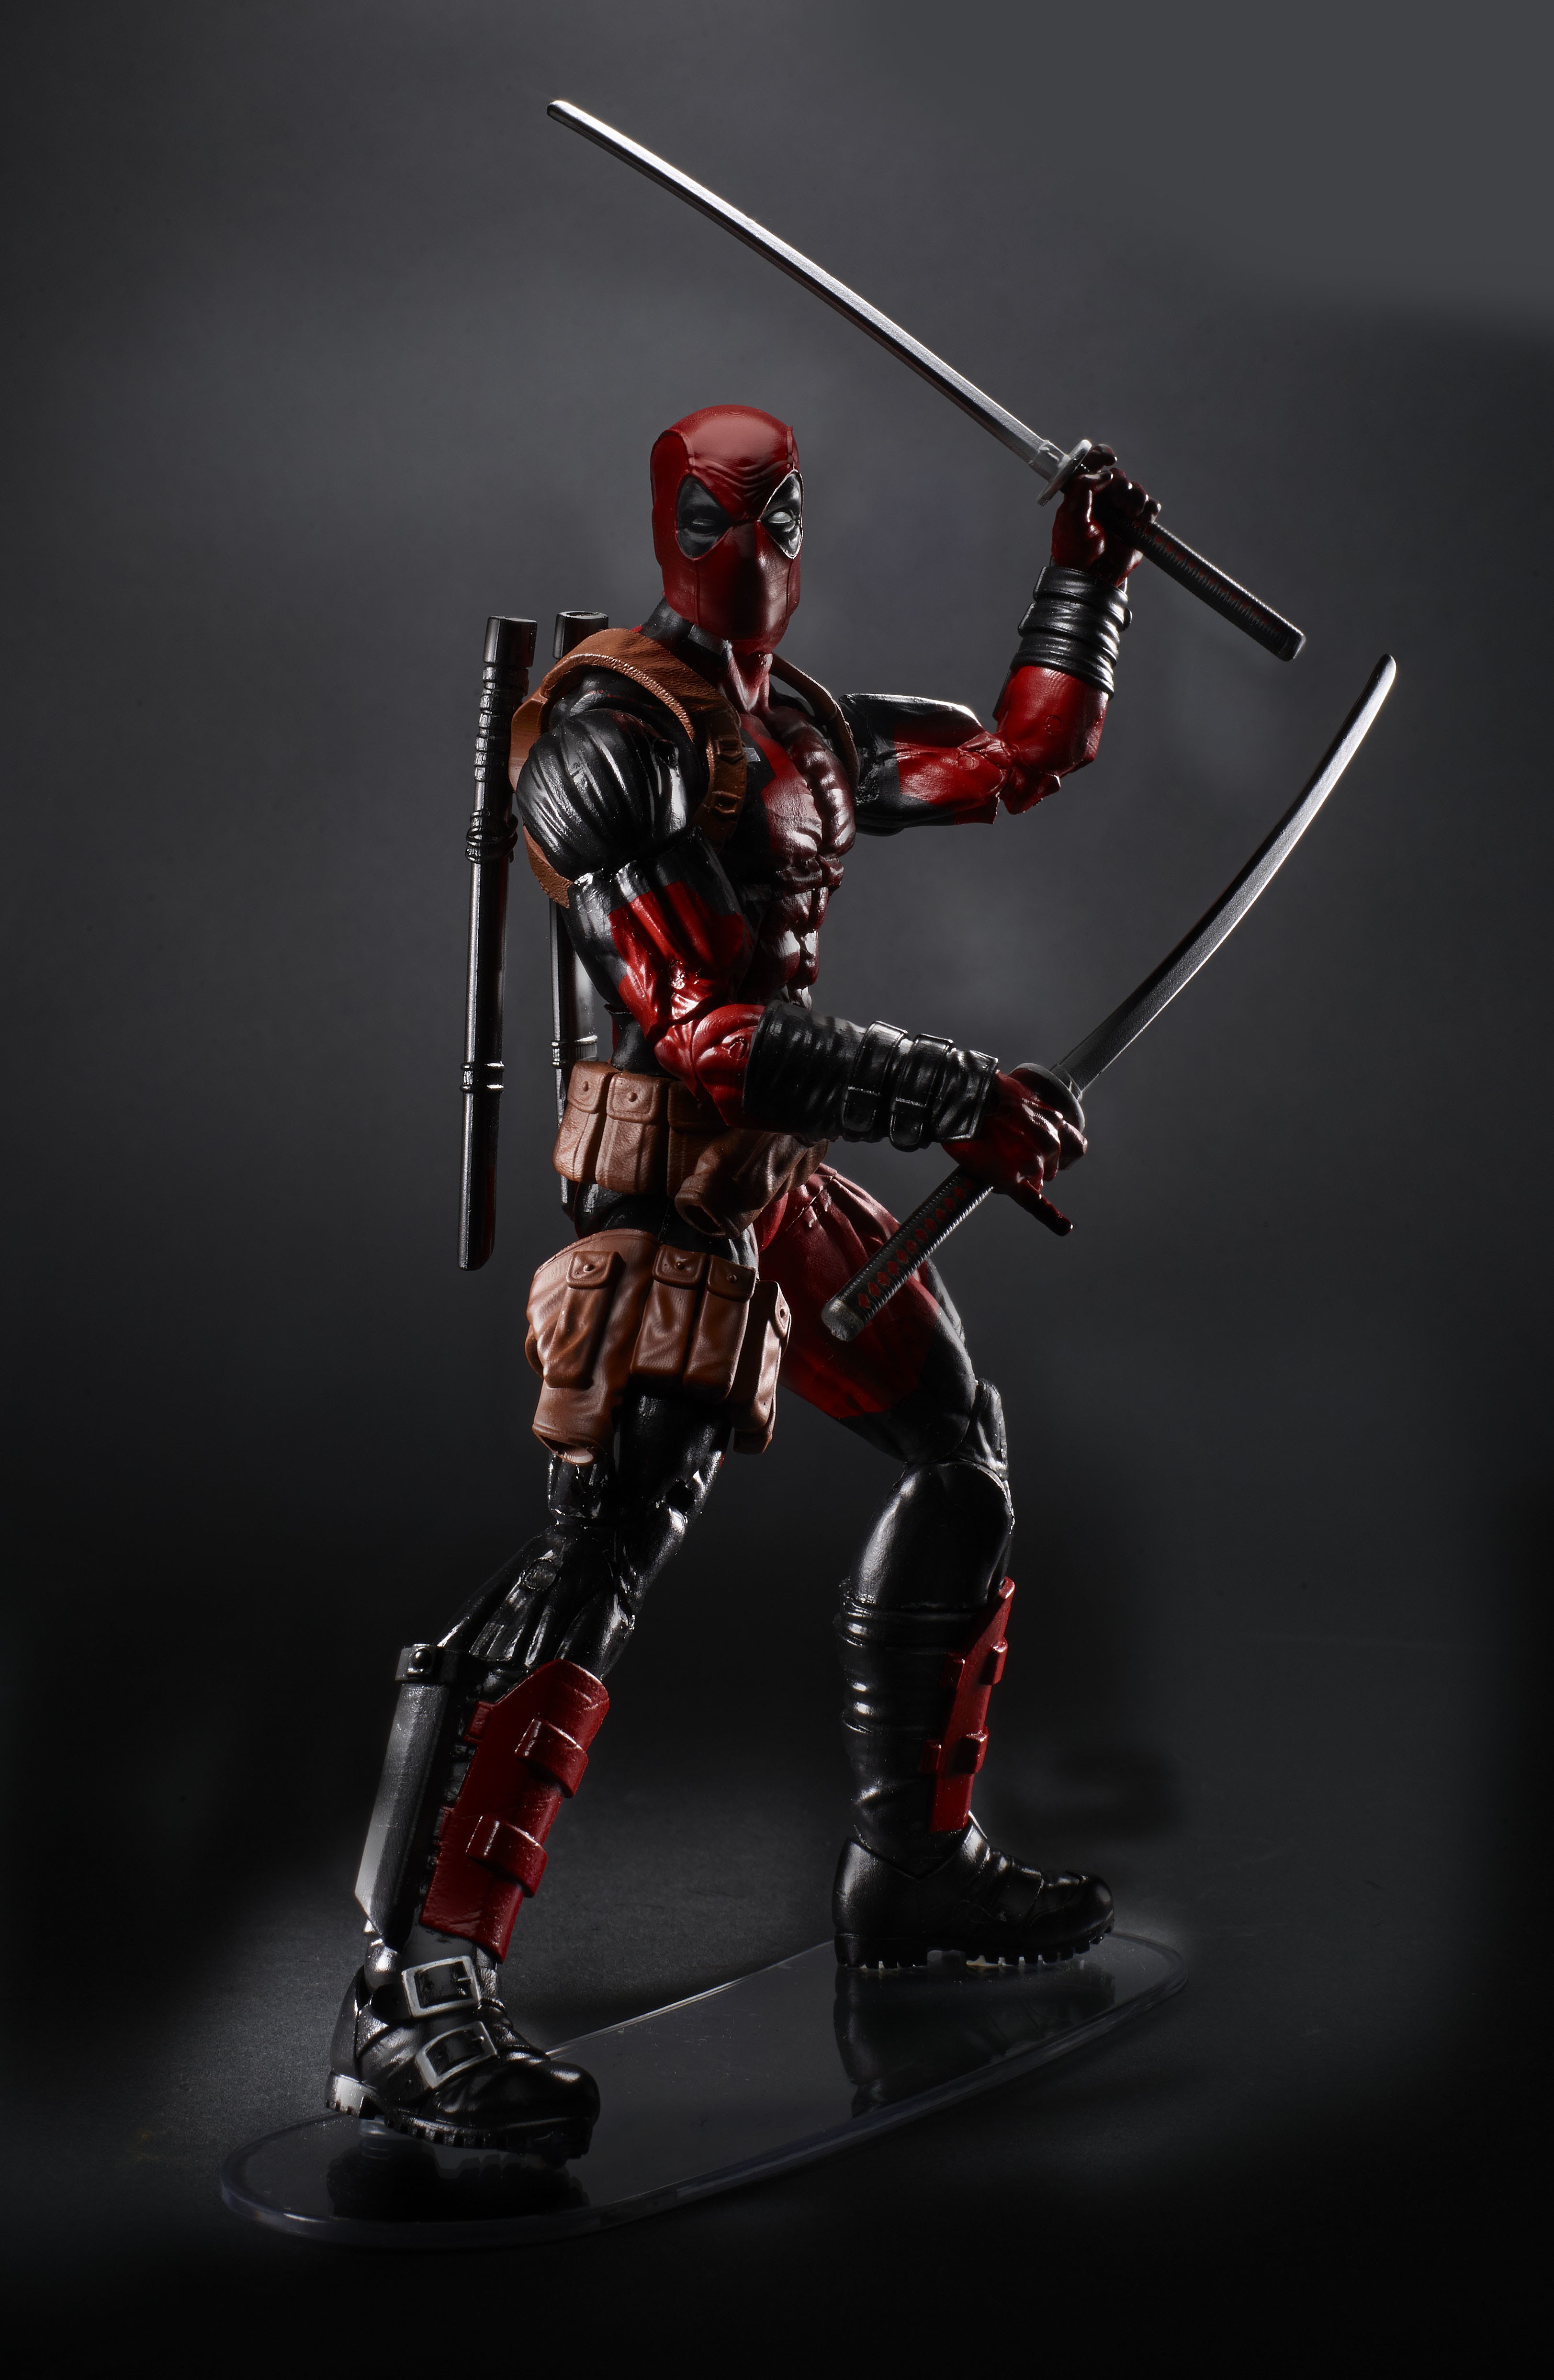 Deadpool Large 300DPI Large Batch of Hasbro Marvel & Star Wars Figure Images From Toy Fair